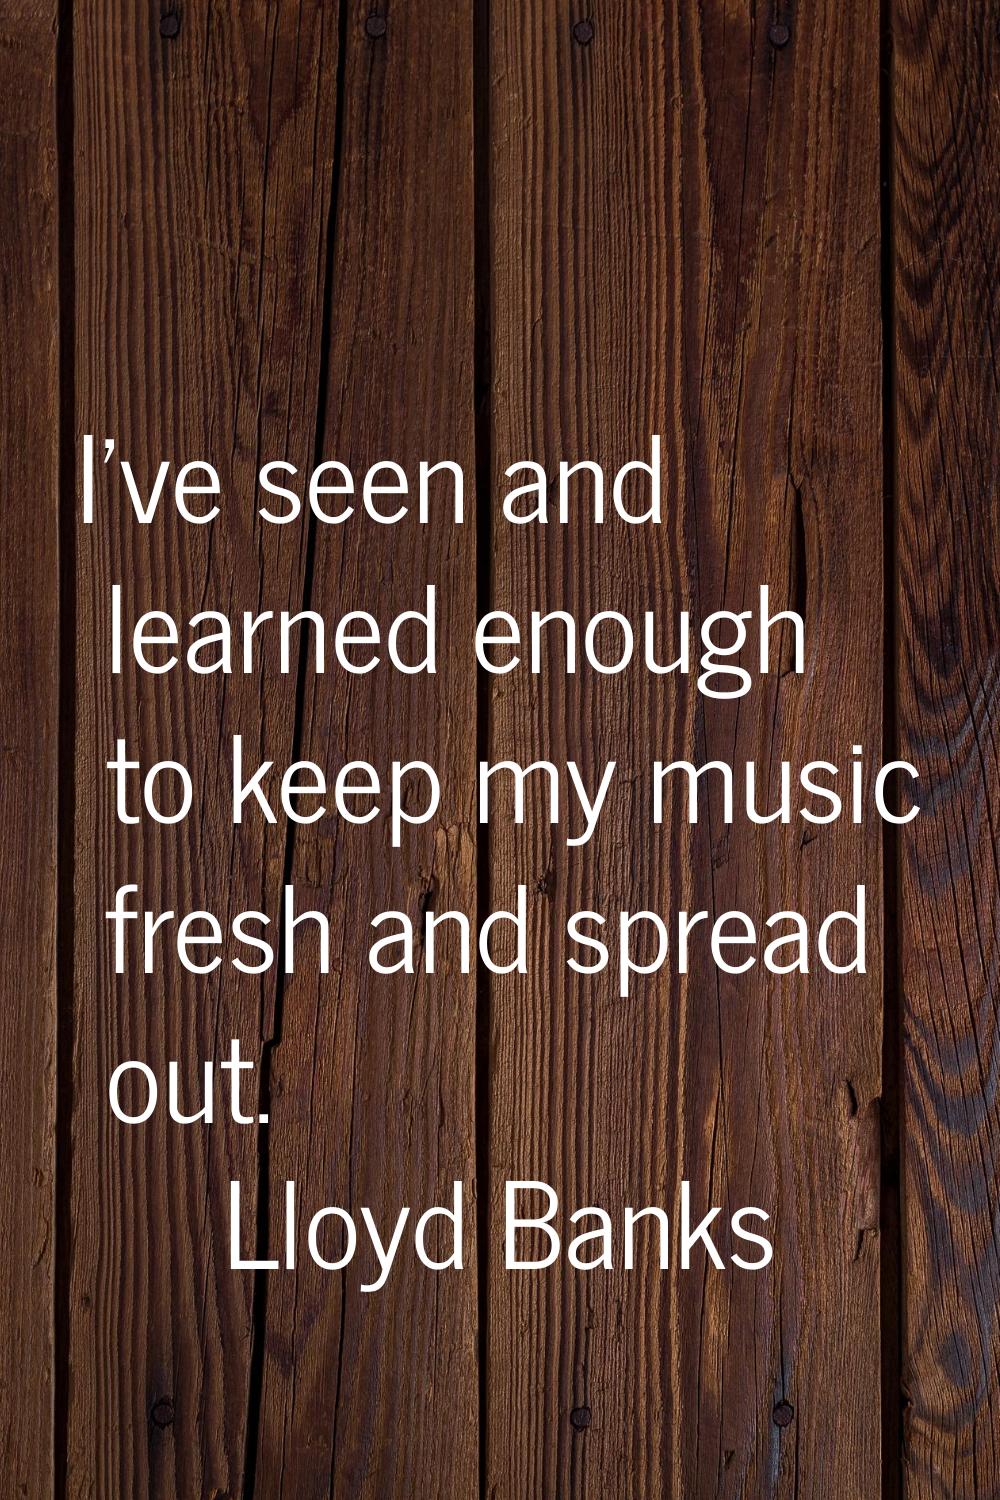 I've seen and learned enough to keep my music fresh and spread out.